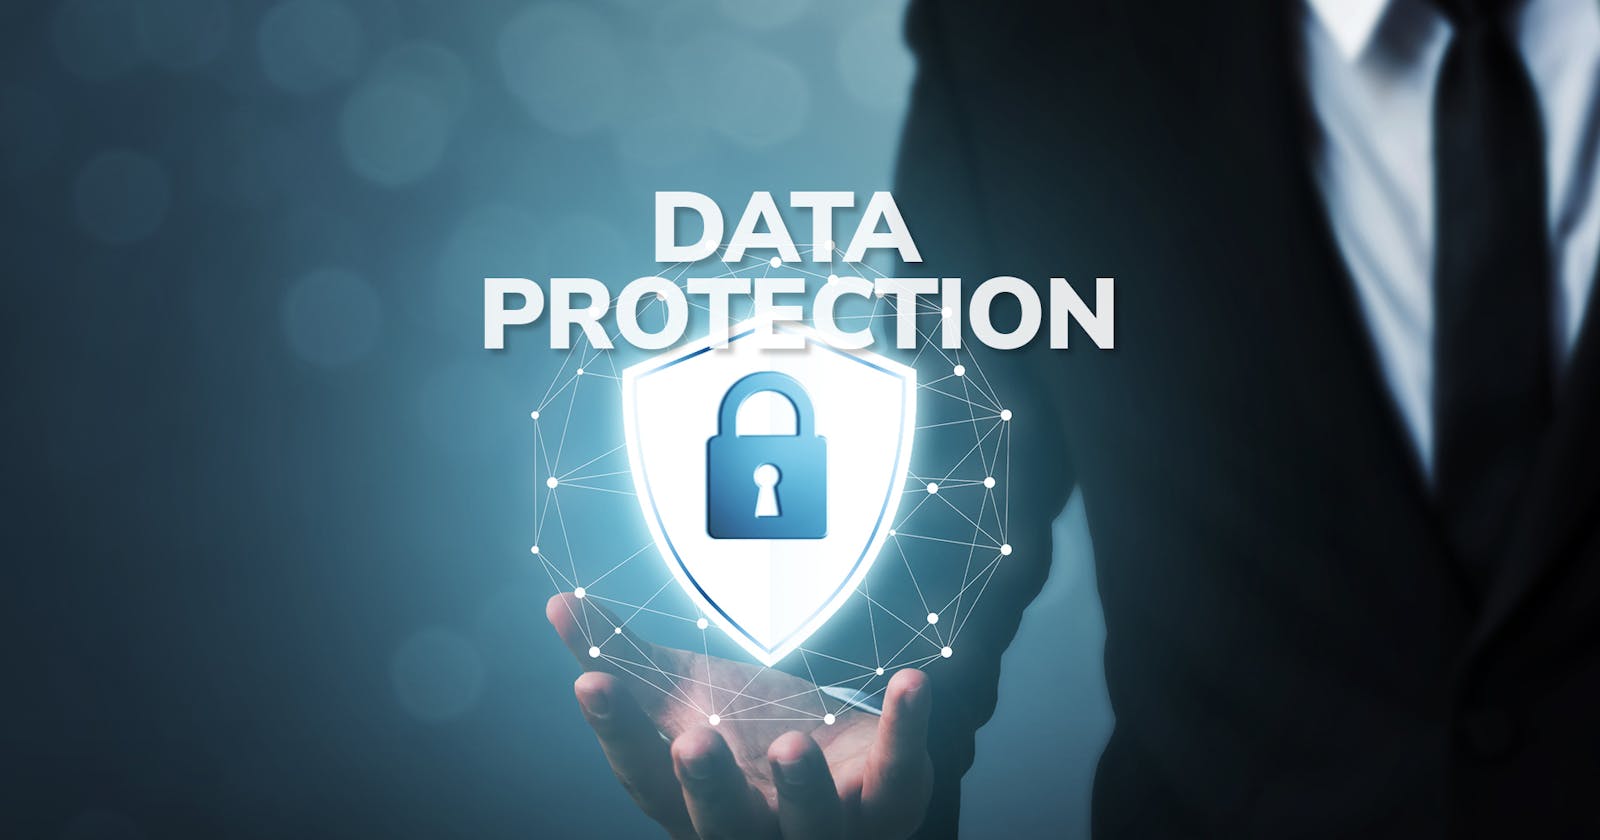 Data Protection and Management System Standards – Which is Best for Me?